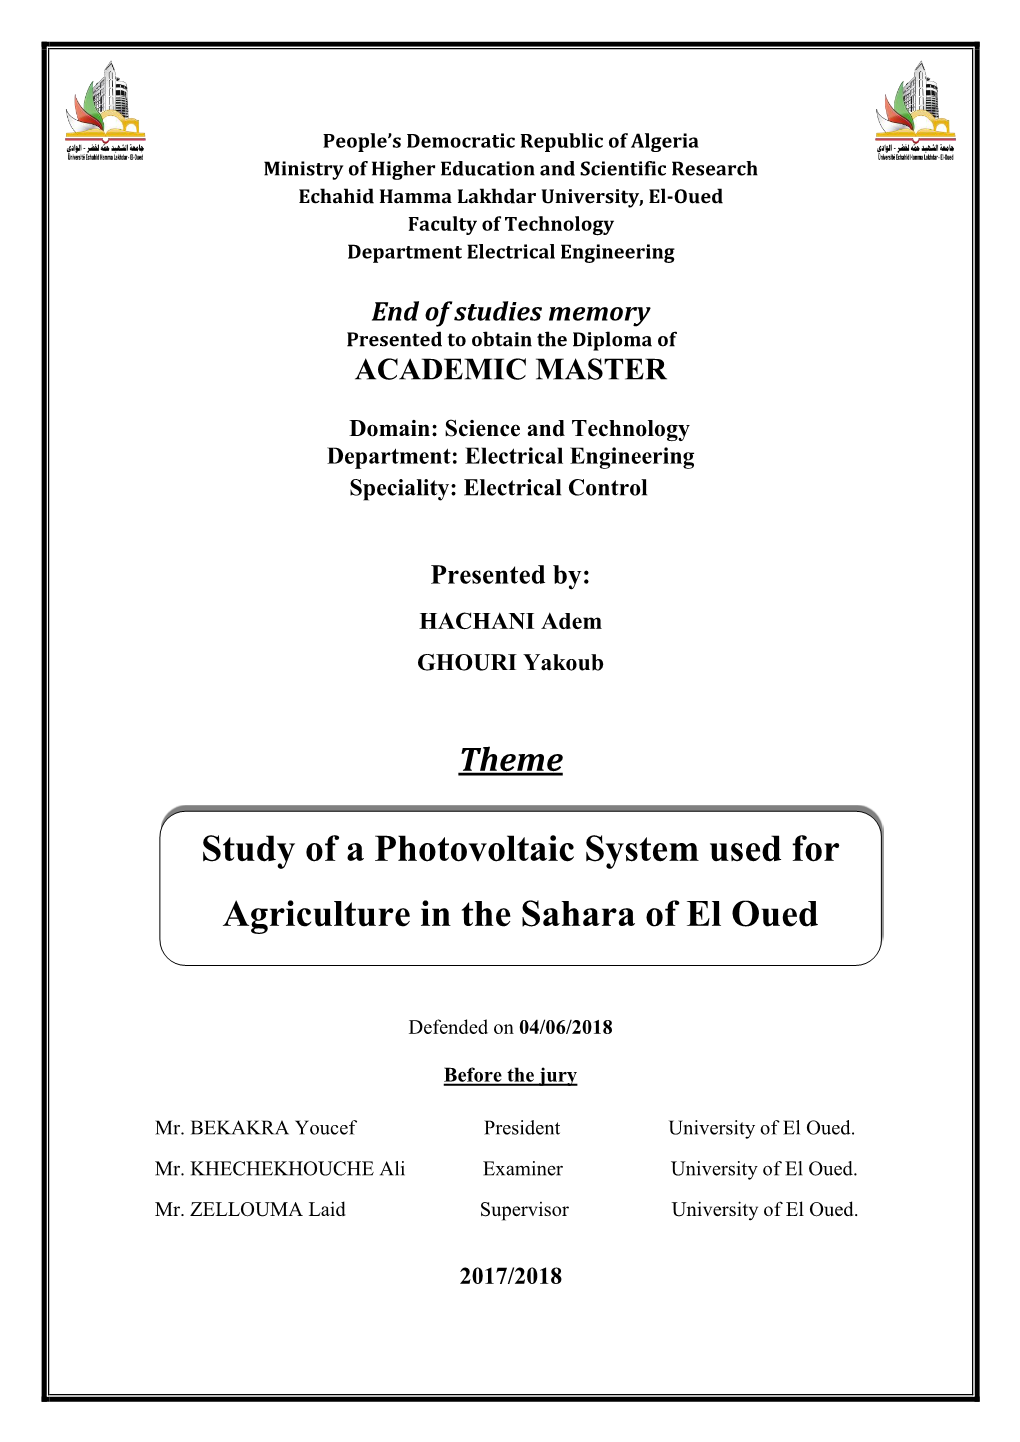 Study of a Photovoltaic System Used for Agriculture in the Sahara of El